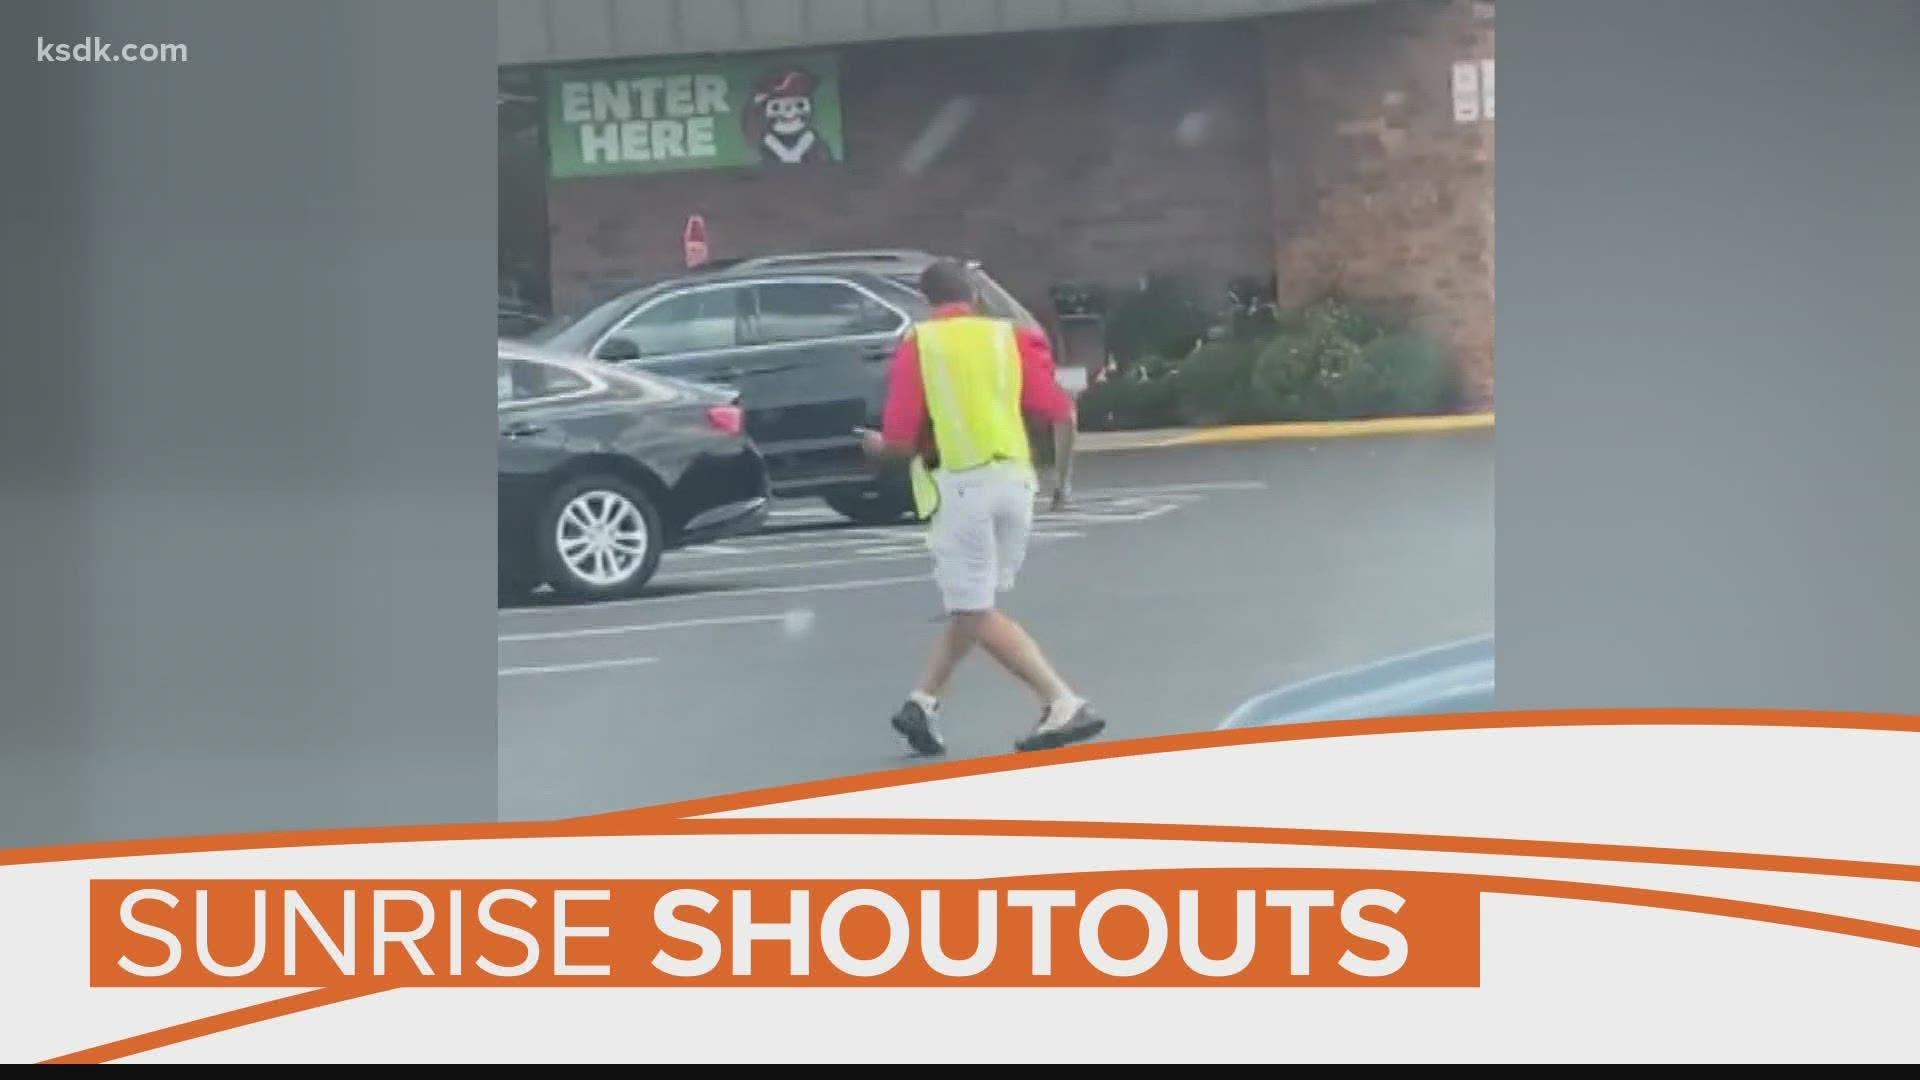 A Schnucks worker is reminding us all life is too short to be stressed out and dancing in public is always a good idea.